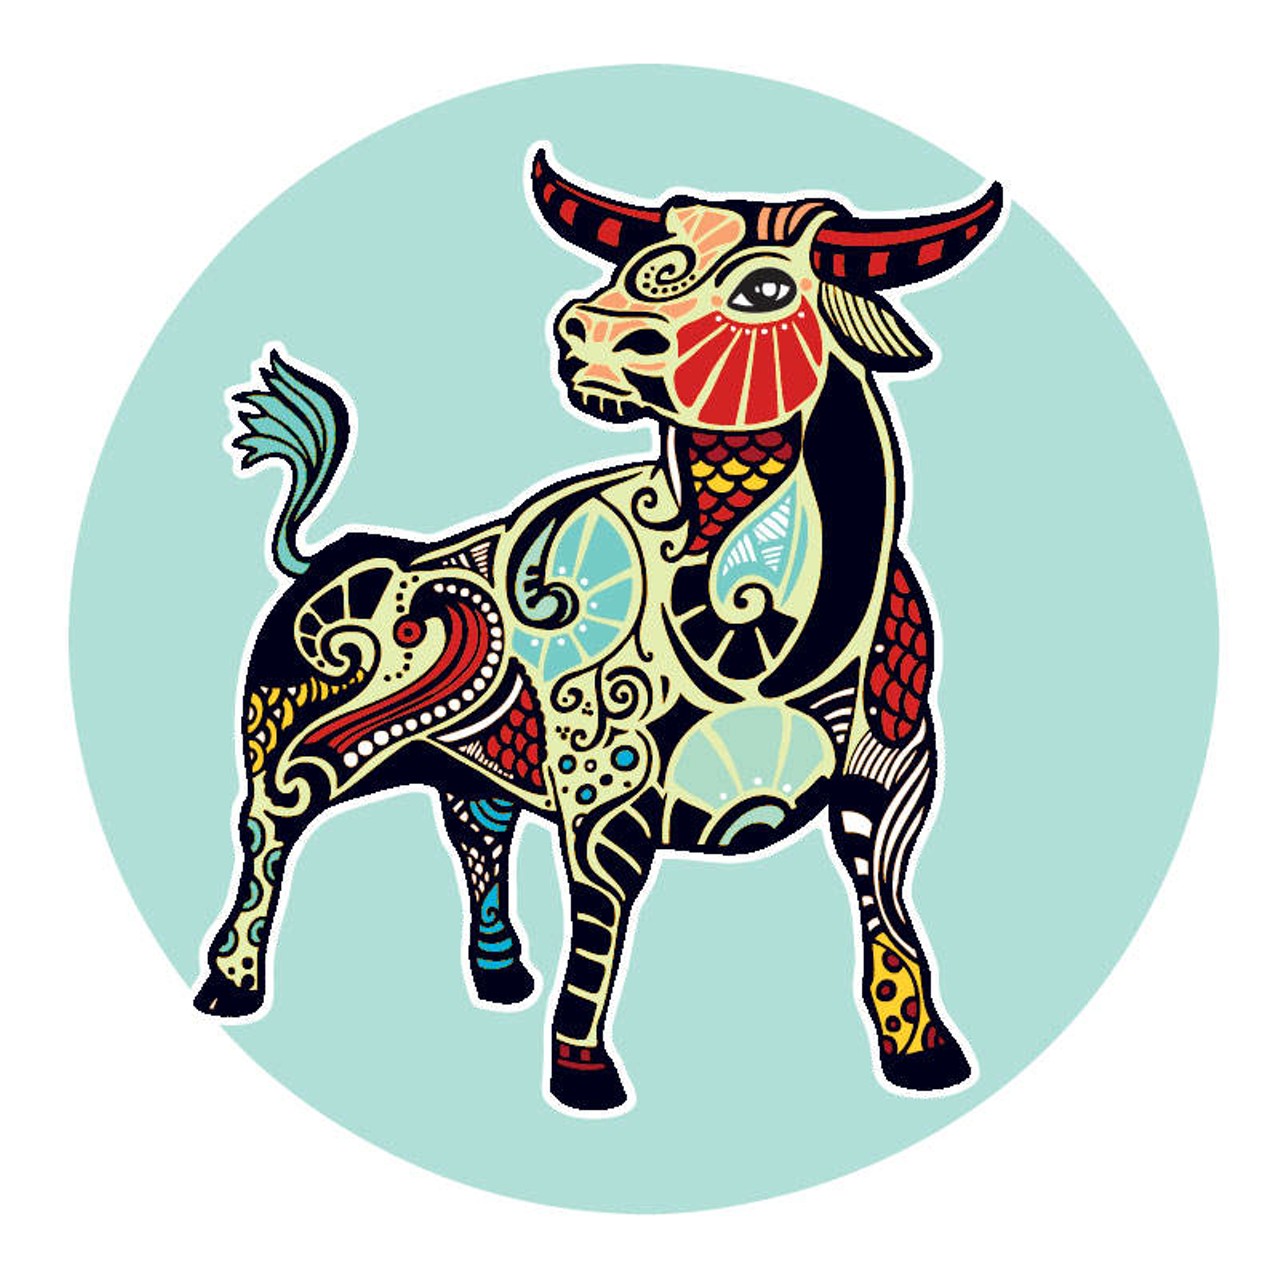 TAURUS (April 21 -May 20): 
Questions that keep begging you to wonder if it&#146;s time to pick up and leave need to be met with a measure of restraint. It will be at least a week before you can see the forest for the trees. In the meantime, let people show you what they&#146;re made of and be mindful of what that says about them. Gossip is running all over the place. By the time it gets back to you, it&#146;ll be too many removes from the truth to get upset about. The last thing you need is to let yourself be distracted by lesser mortals &#151; especially now, when your truer calling is waking up the wish to make a difference.